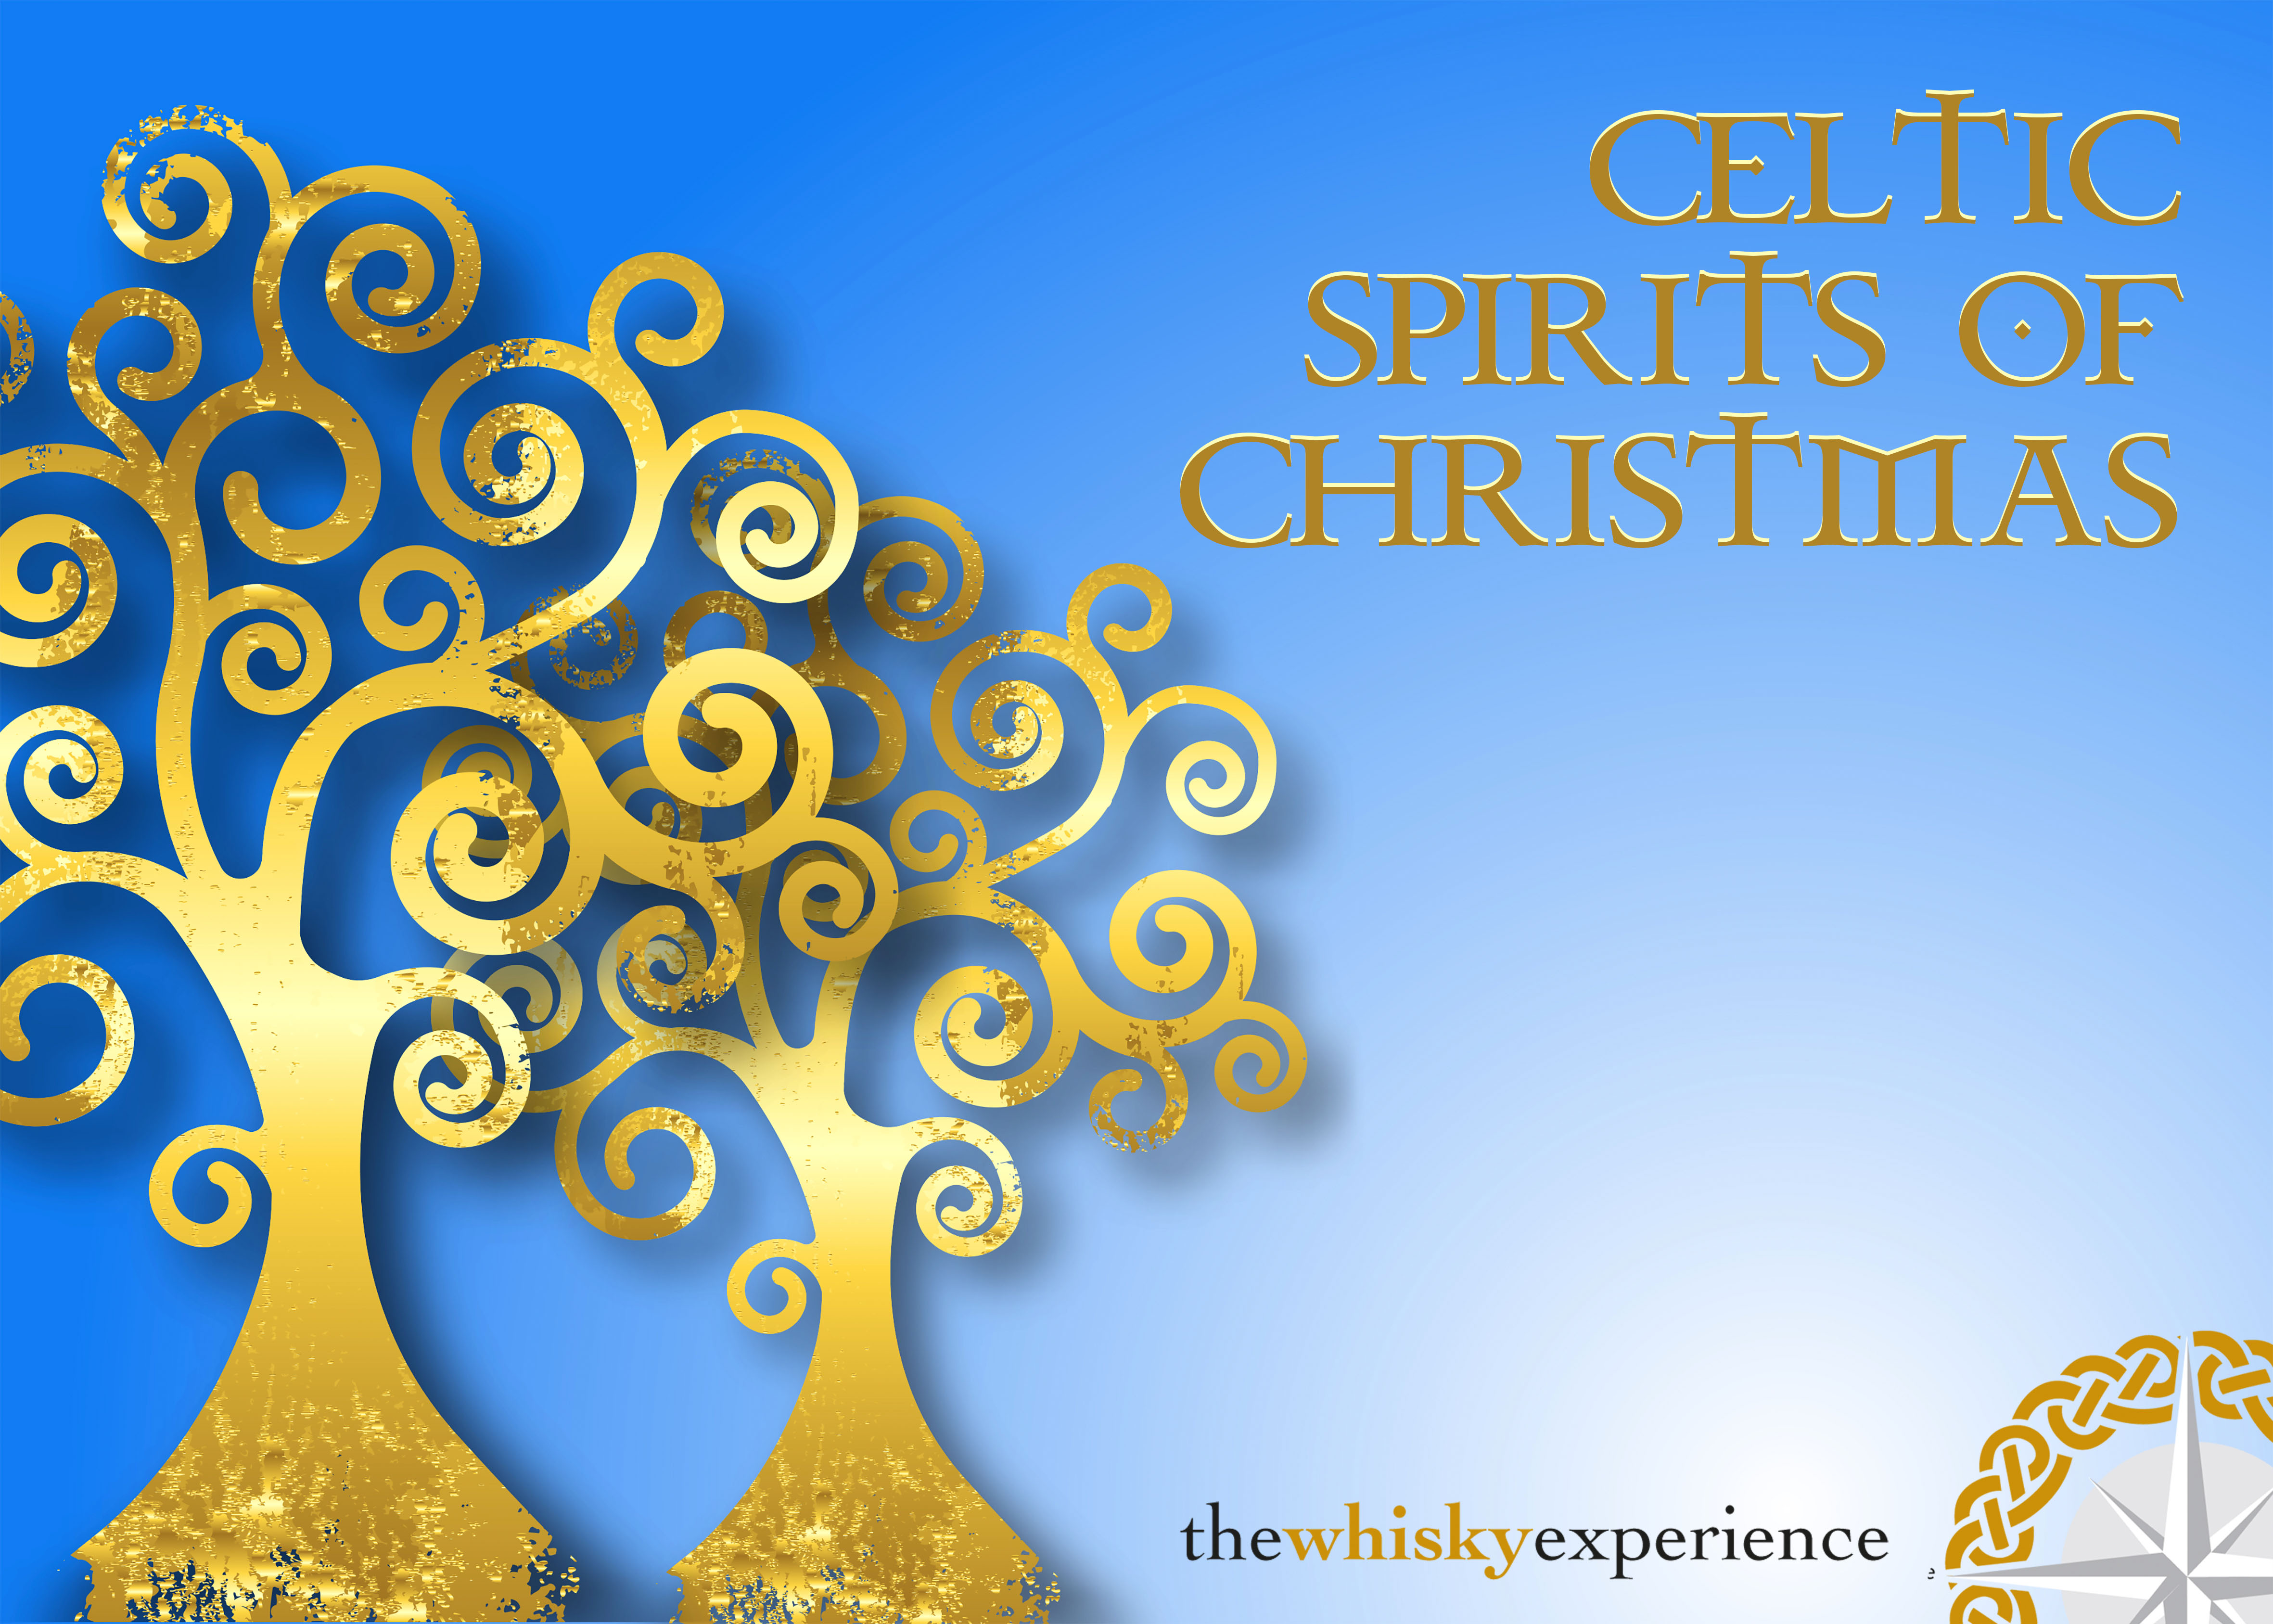 CELTIC SPIRITS OF CHRISTMAS at the Parkhotel Zug